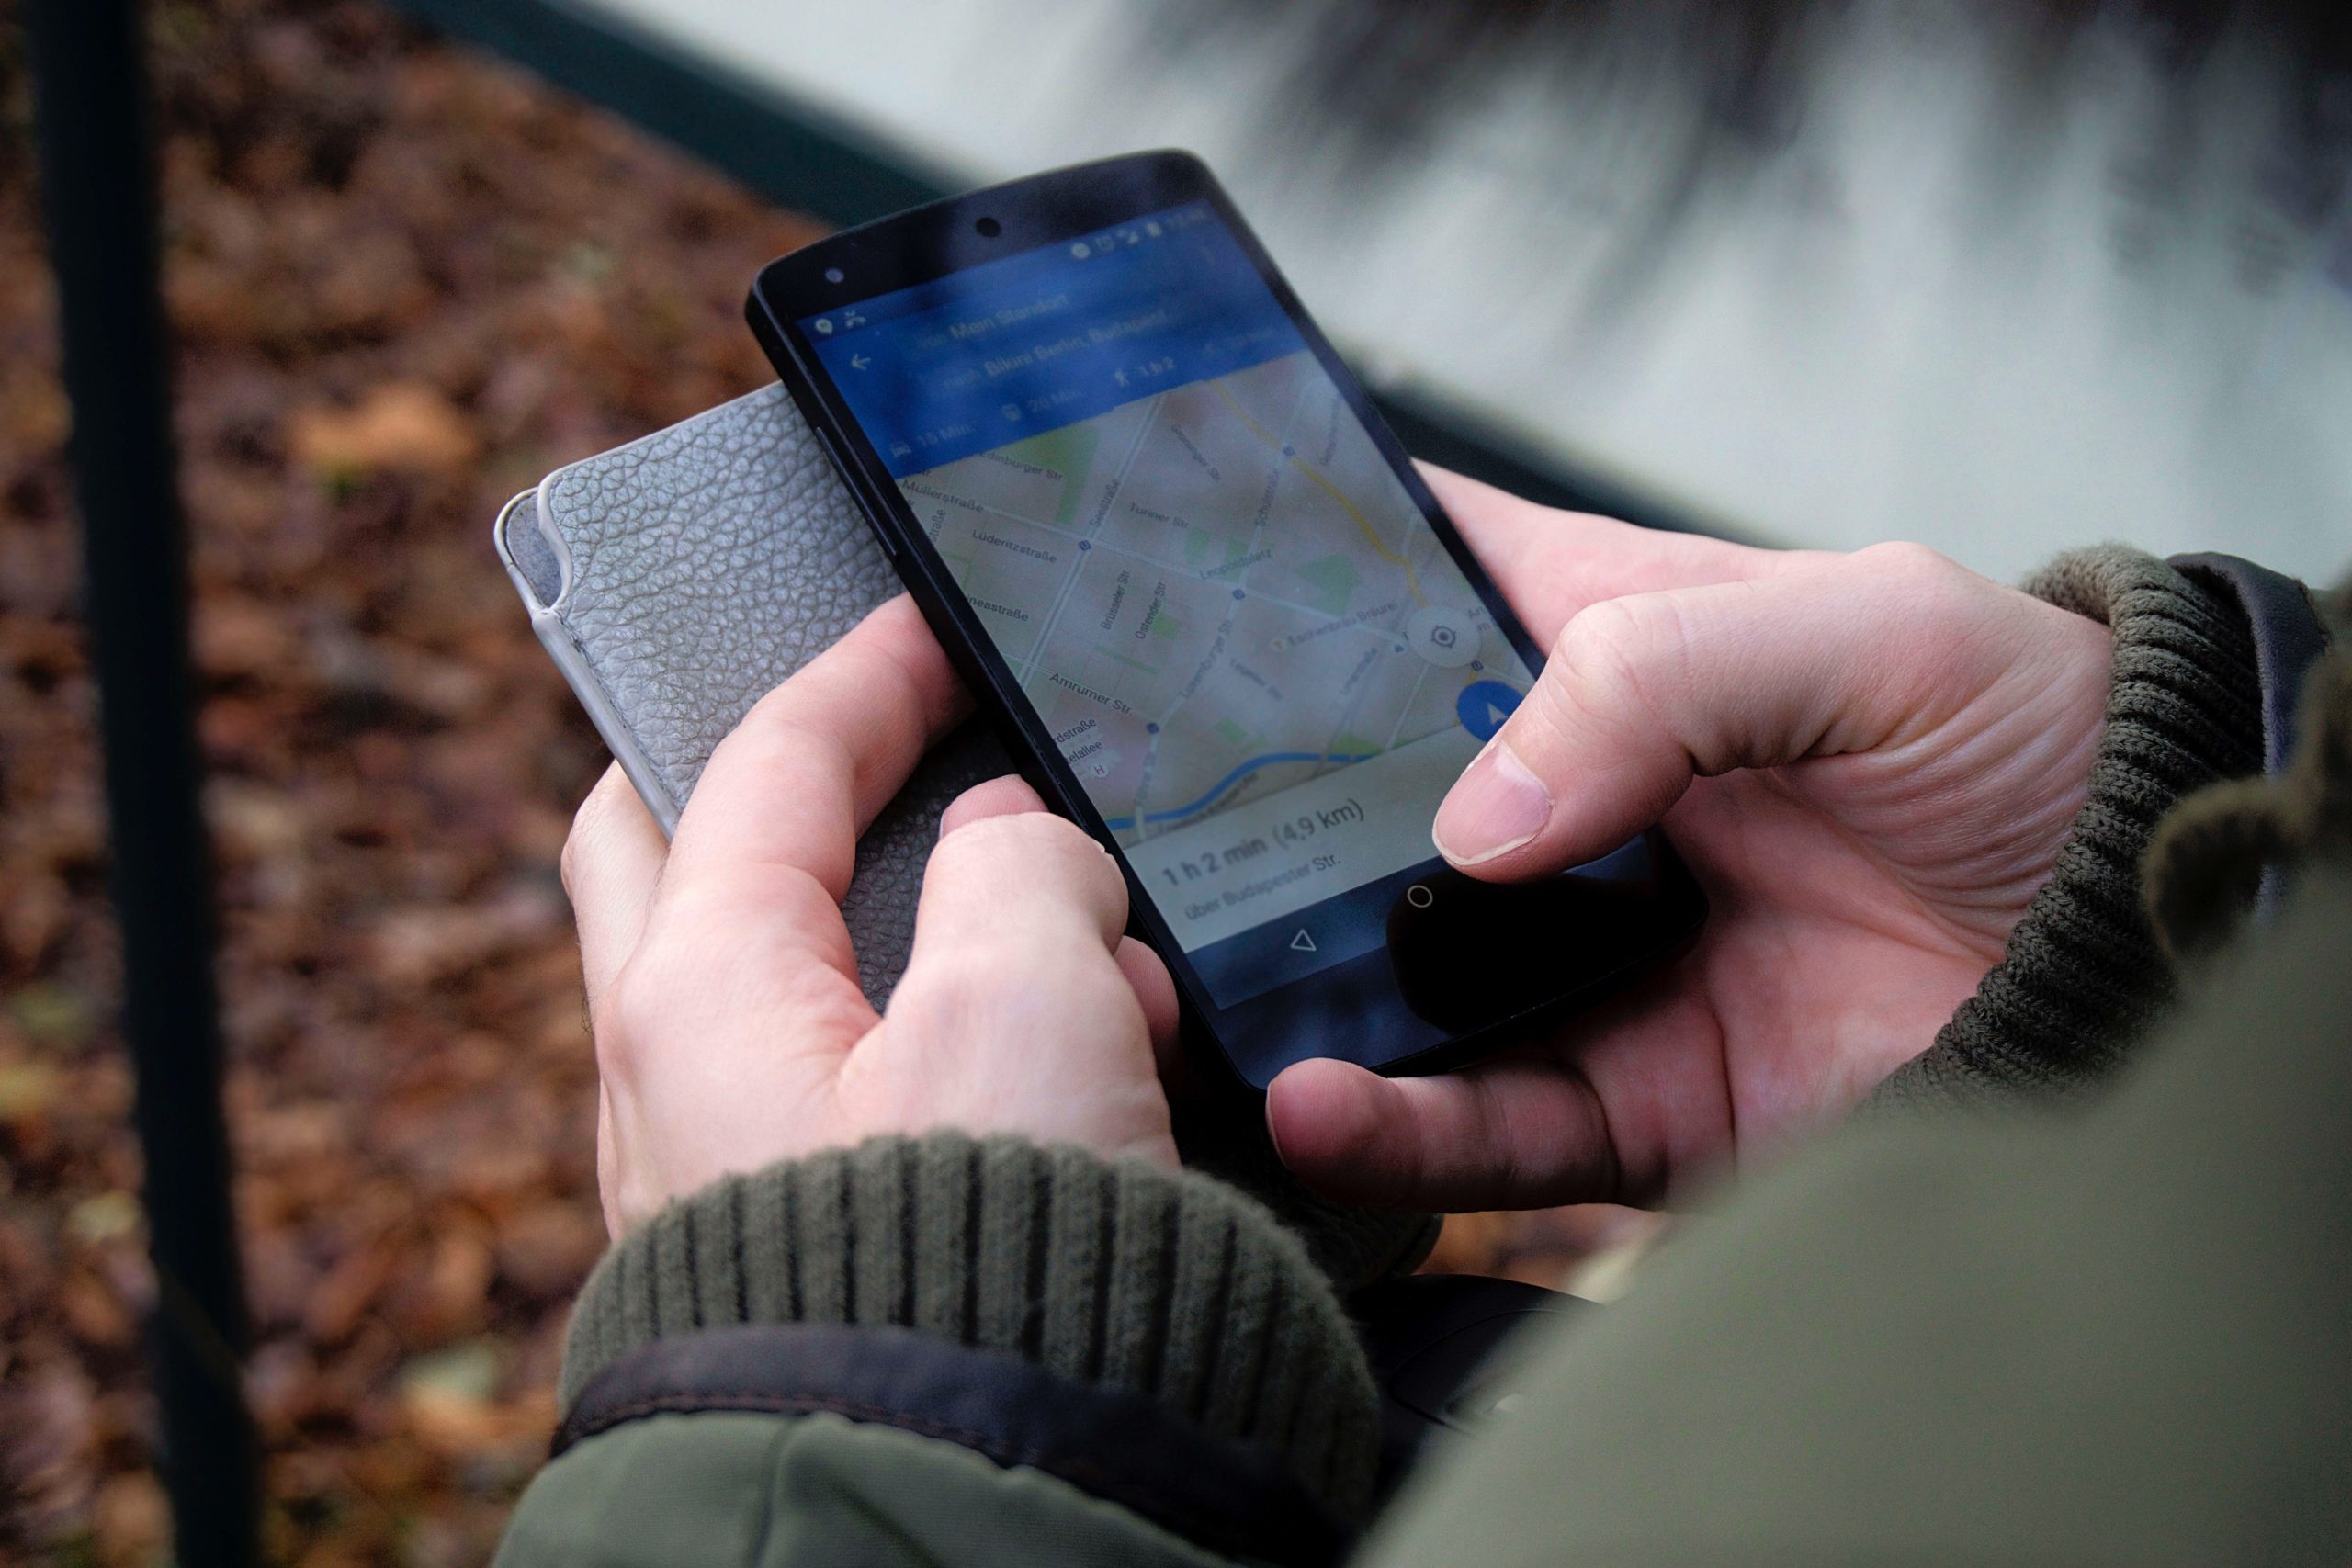 A pair of hands looks at a map on a smart phone, an example of following Hoffman Realty's storm advice regarding staying up to date.